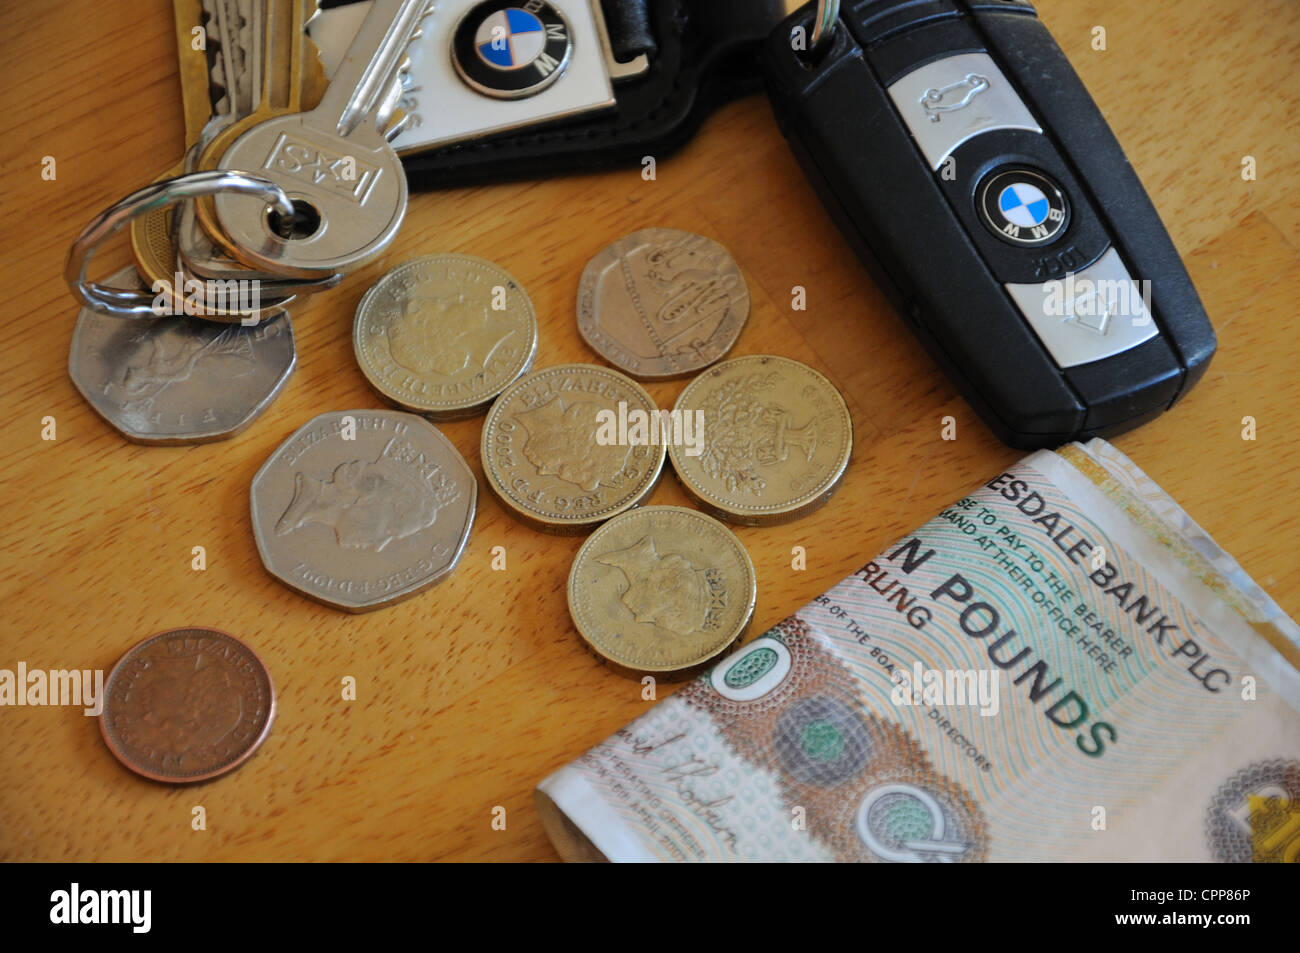 House keys, car keys, notes and loose change on table top. Stock Photo